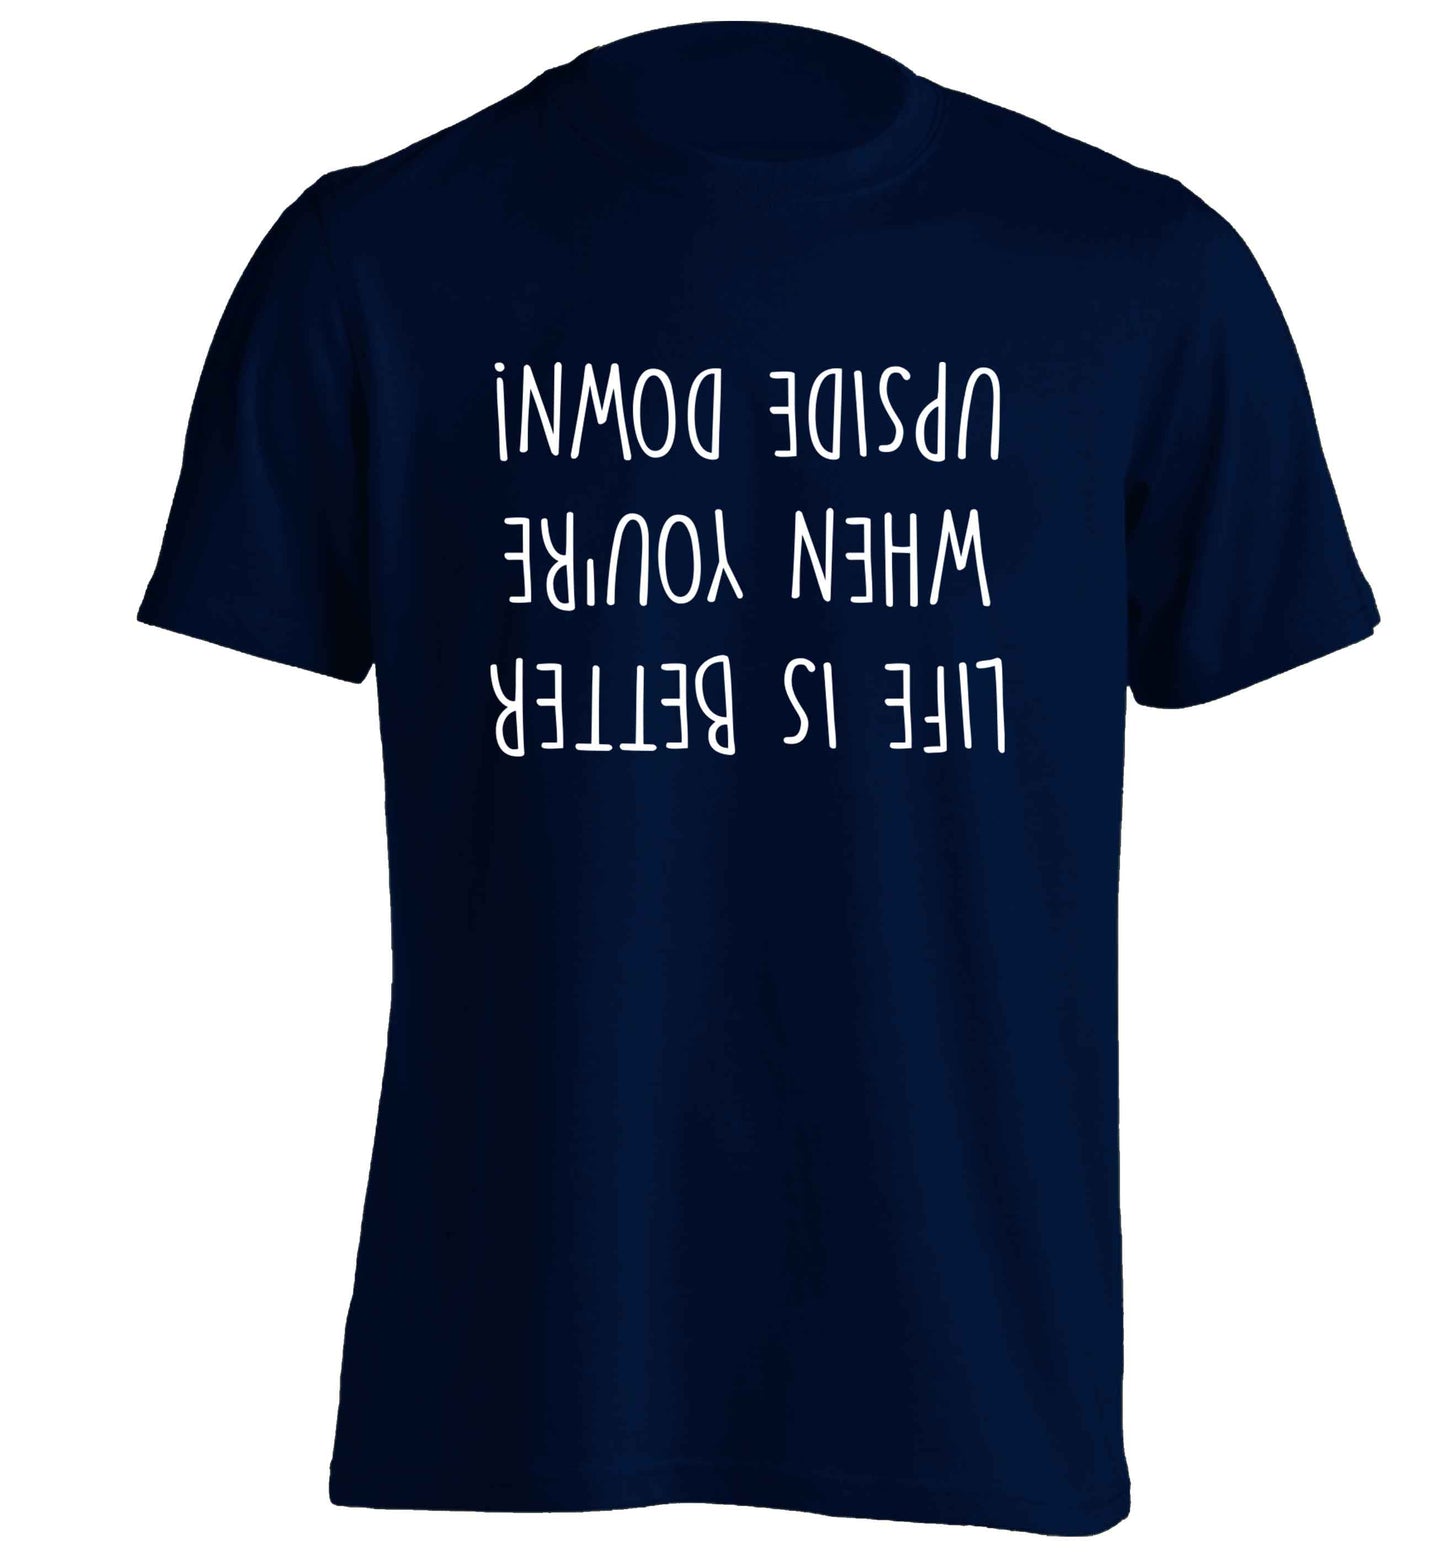 Life is better upside down adults unisex navy Tshirt 2XL